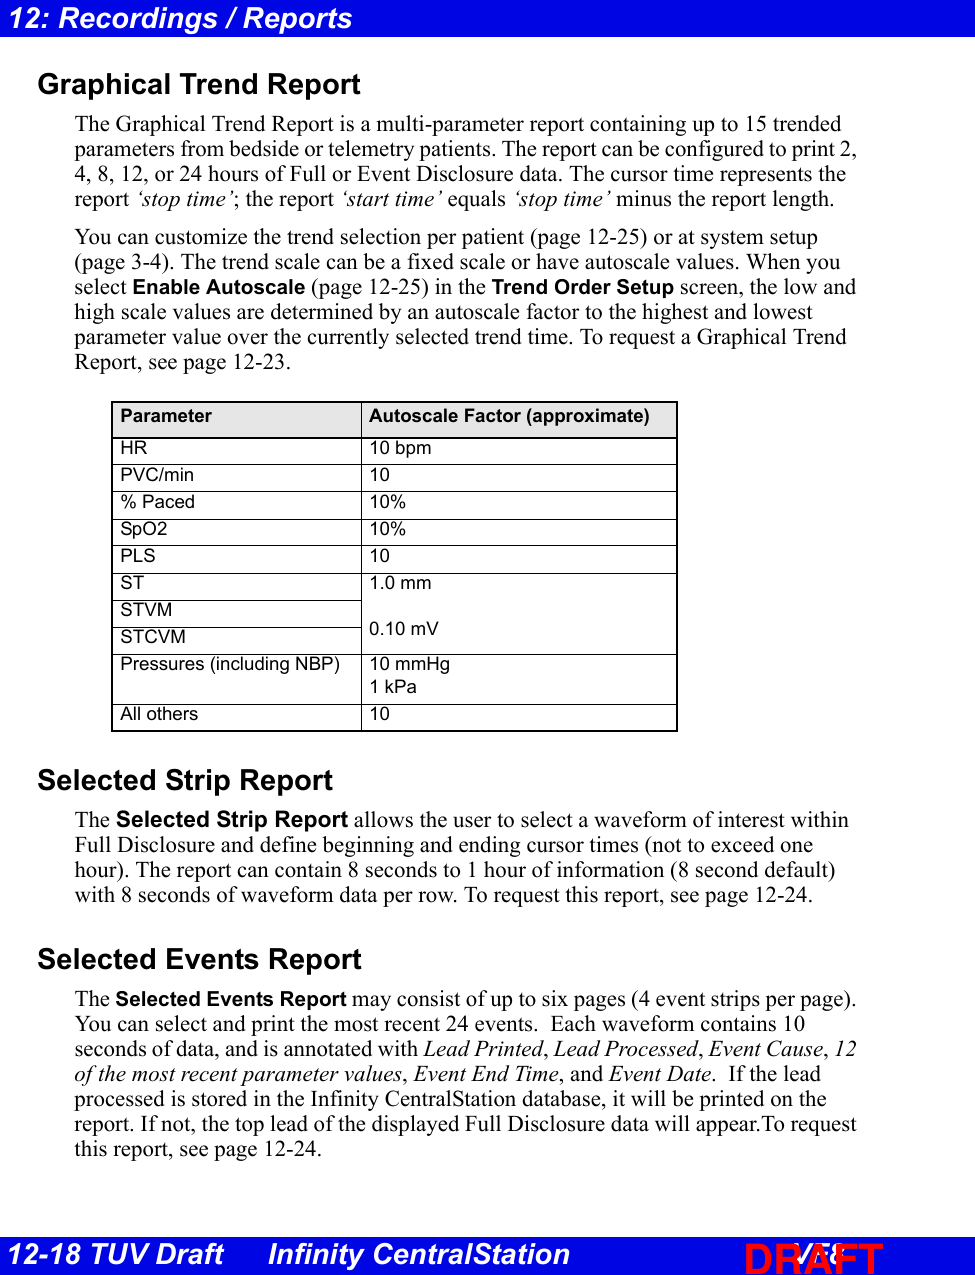 12-18 TUV Draft Infinity CentralStation VF812: Recordings / ReportsGraphical Trend ReportThe Graphical Trend Report is a multi-parameter report containing up to 15 trended parameters from bedside or telemetry patients. The report can be configured to print 2, 4, 8, 12, or 24 hours of Full or Event Disclosure data. The cursor time represents the report ‘stop time’; the report ‘start time’ equals ‘stop time’ minus the report length. You can customize the trend selection per patient (page 12-25) or at system setup (page 3-4). The trend scale can be a fixed scale or have autoscale values. When you select Enable Autoscale (page 12-25) in the Trend Order Setup screen, the low and high scale values are determined by an autoscale factor to the highest and lowest parameter value over the currently selected trend time. To request a Graphical Trend Report, see page 12-23.Selected Strip ReportThe Selected Strip Report allows the user to select a waveform of interest within Full Disclosure and define beginning and ending cursor times (not to exceed one hour). The report can contain 8 seconds to 1 hour of information (8 second default) with 8 seconds of waveform data per row. To request this report, see page 12-24. Selected Events ReportThe Selected Events Report may consist of up to six pages (4 event strips per page). You can select and print the most recent 24 events.  Each waveform contains 10 seconds of data, and is annotated with Lead Printed, Lead Processed, Event Cause, 12 of the most recent parameter values, Event End Time, and Event Date.  If the lead processed is stored in the Infinity CentralStation database, it will be printed on the report. If not, the top lead of the displayed Full Disclosure data will appear.To request this report, see page 12-24.Parameter Autoscale Factor (approximate)HR 10 bpmPVC/min 10% Paced 10%SpO2 10%PLS 10ST 1.0 mm0.10 mVSTVMSTCVMPressures (including NBP) 10 mmHg1 kPaAll others 10DRAFT